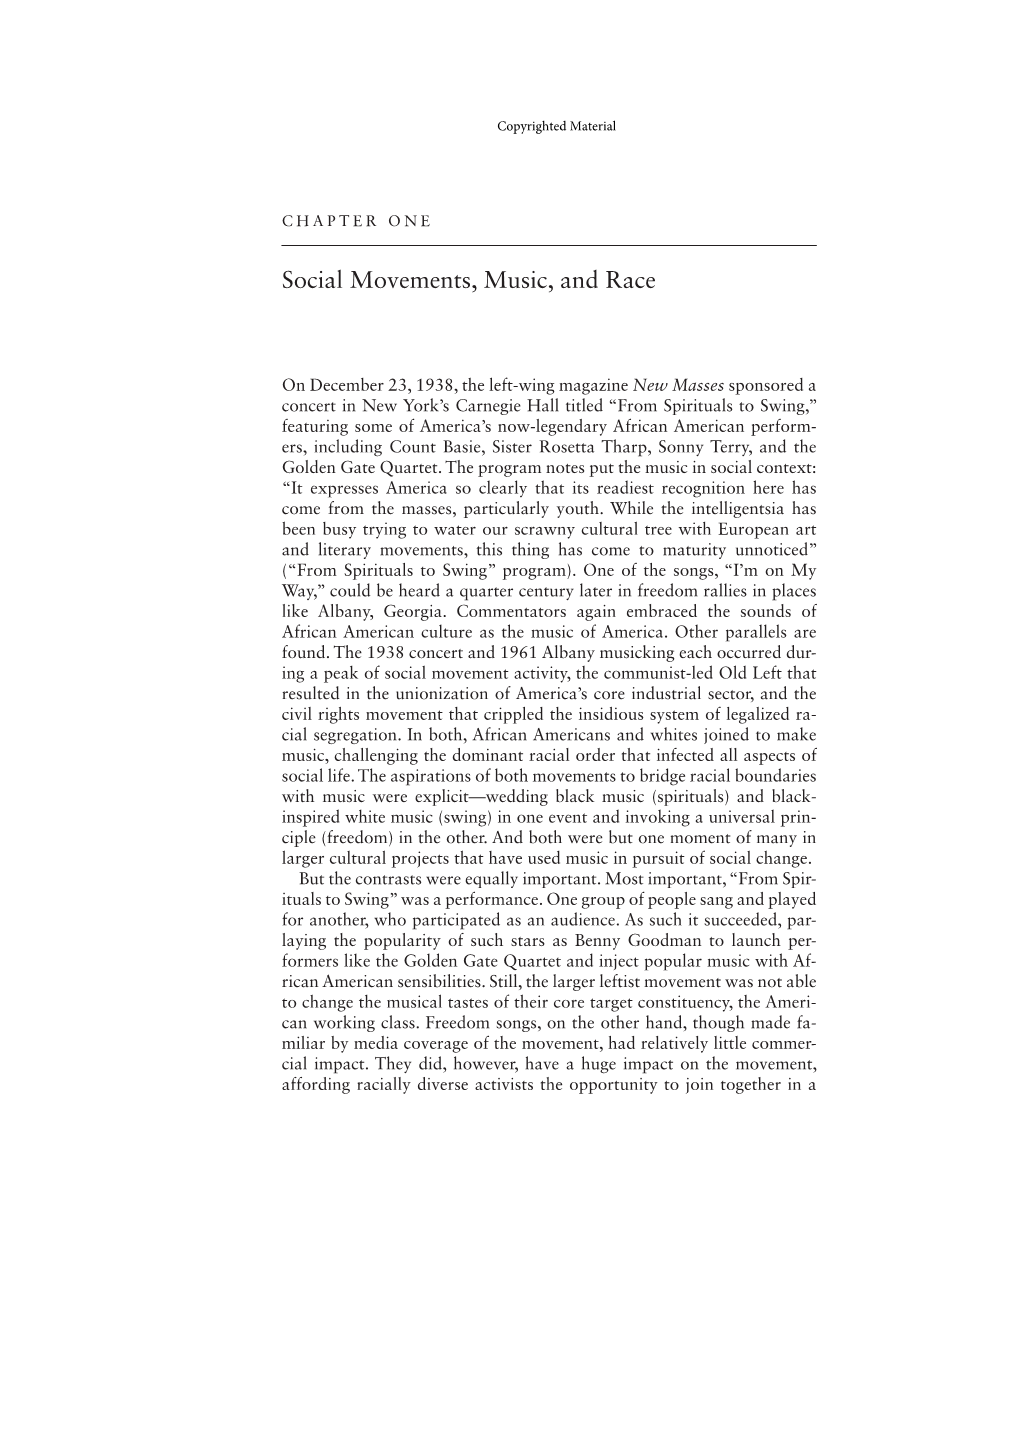 Social Movements, Music, and Race